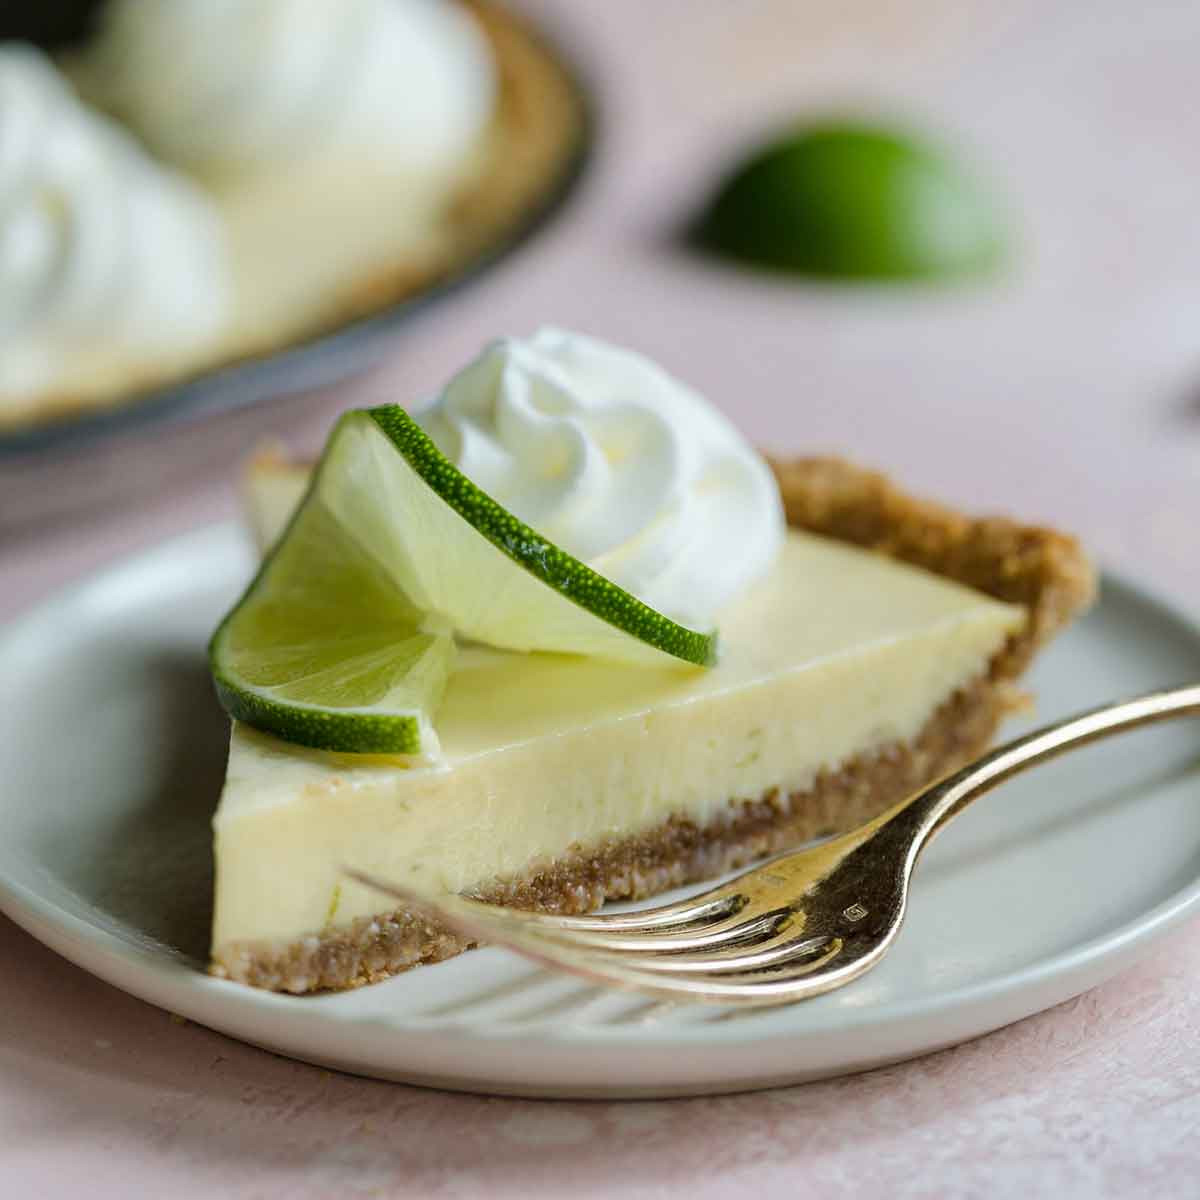 Slice of key lime pie on a plate with a fork, topped with small swirl of whipped cream and lime slice.